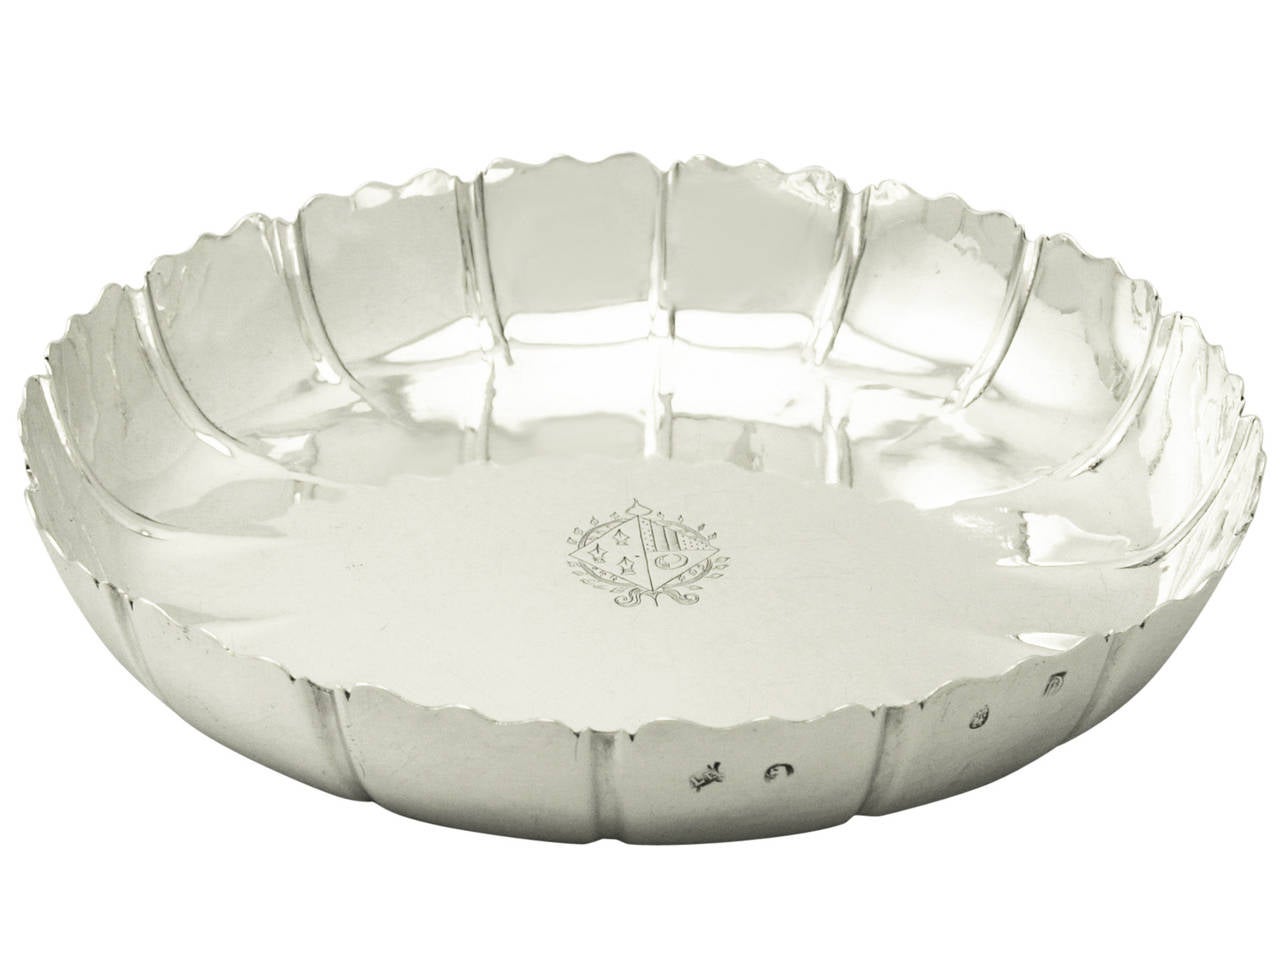 A fine and impressive antique Queen Anne Britannia standard silver strawberry dish; an addition to our dining silverware collection

This fine antique Queen Anne Britannia standard silver* strawberry dish has a plain circular form.

The panelled